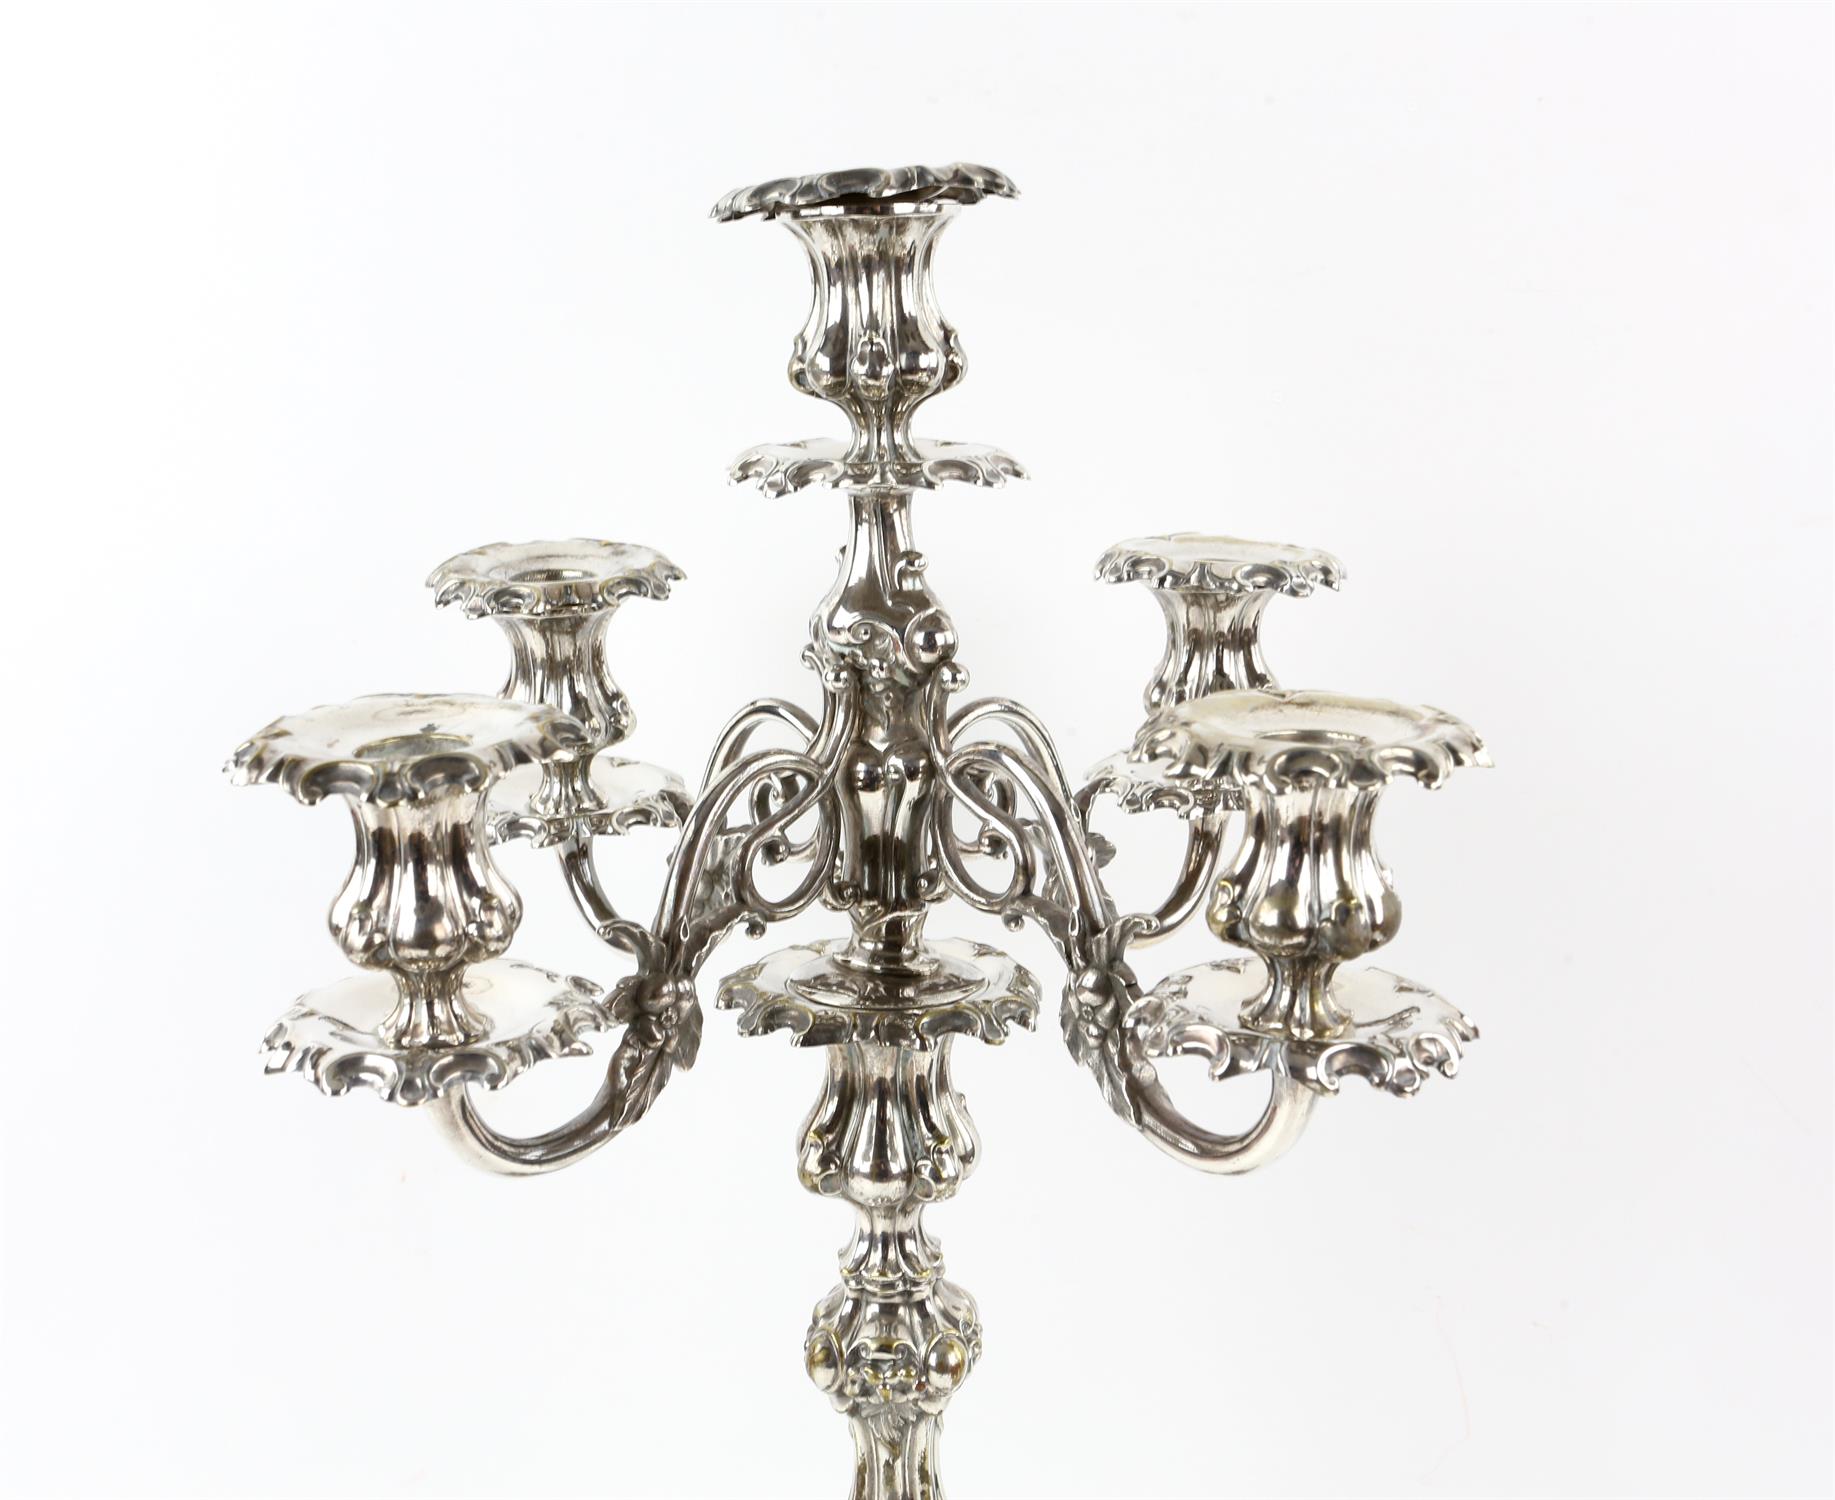 Pair of German silver plated five-light candelabra by Henniger, on waisted columns, - Image 4 of 11